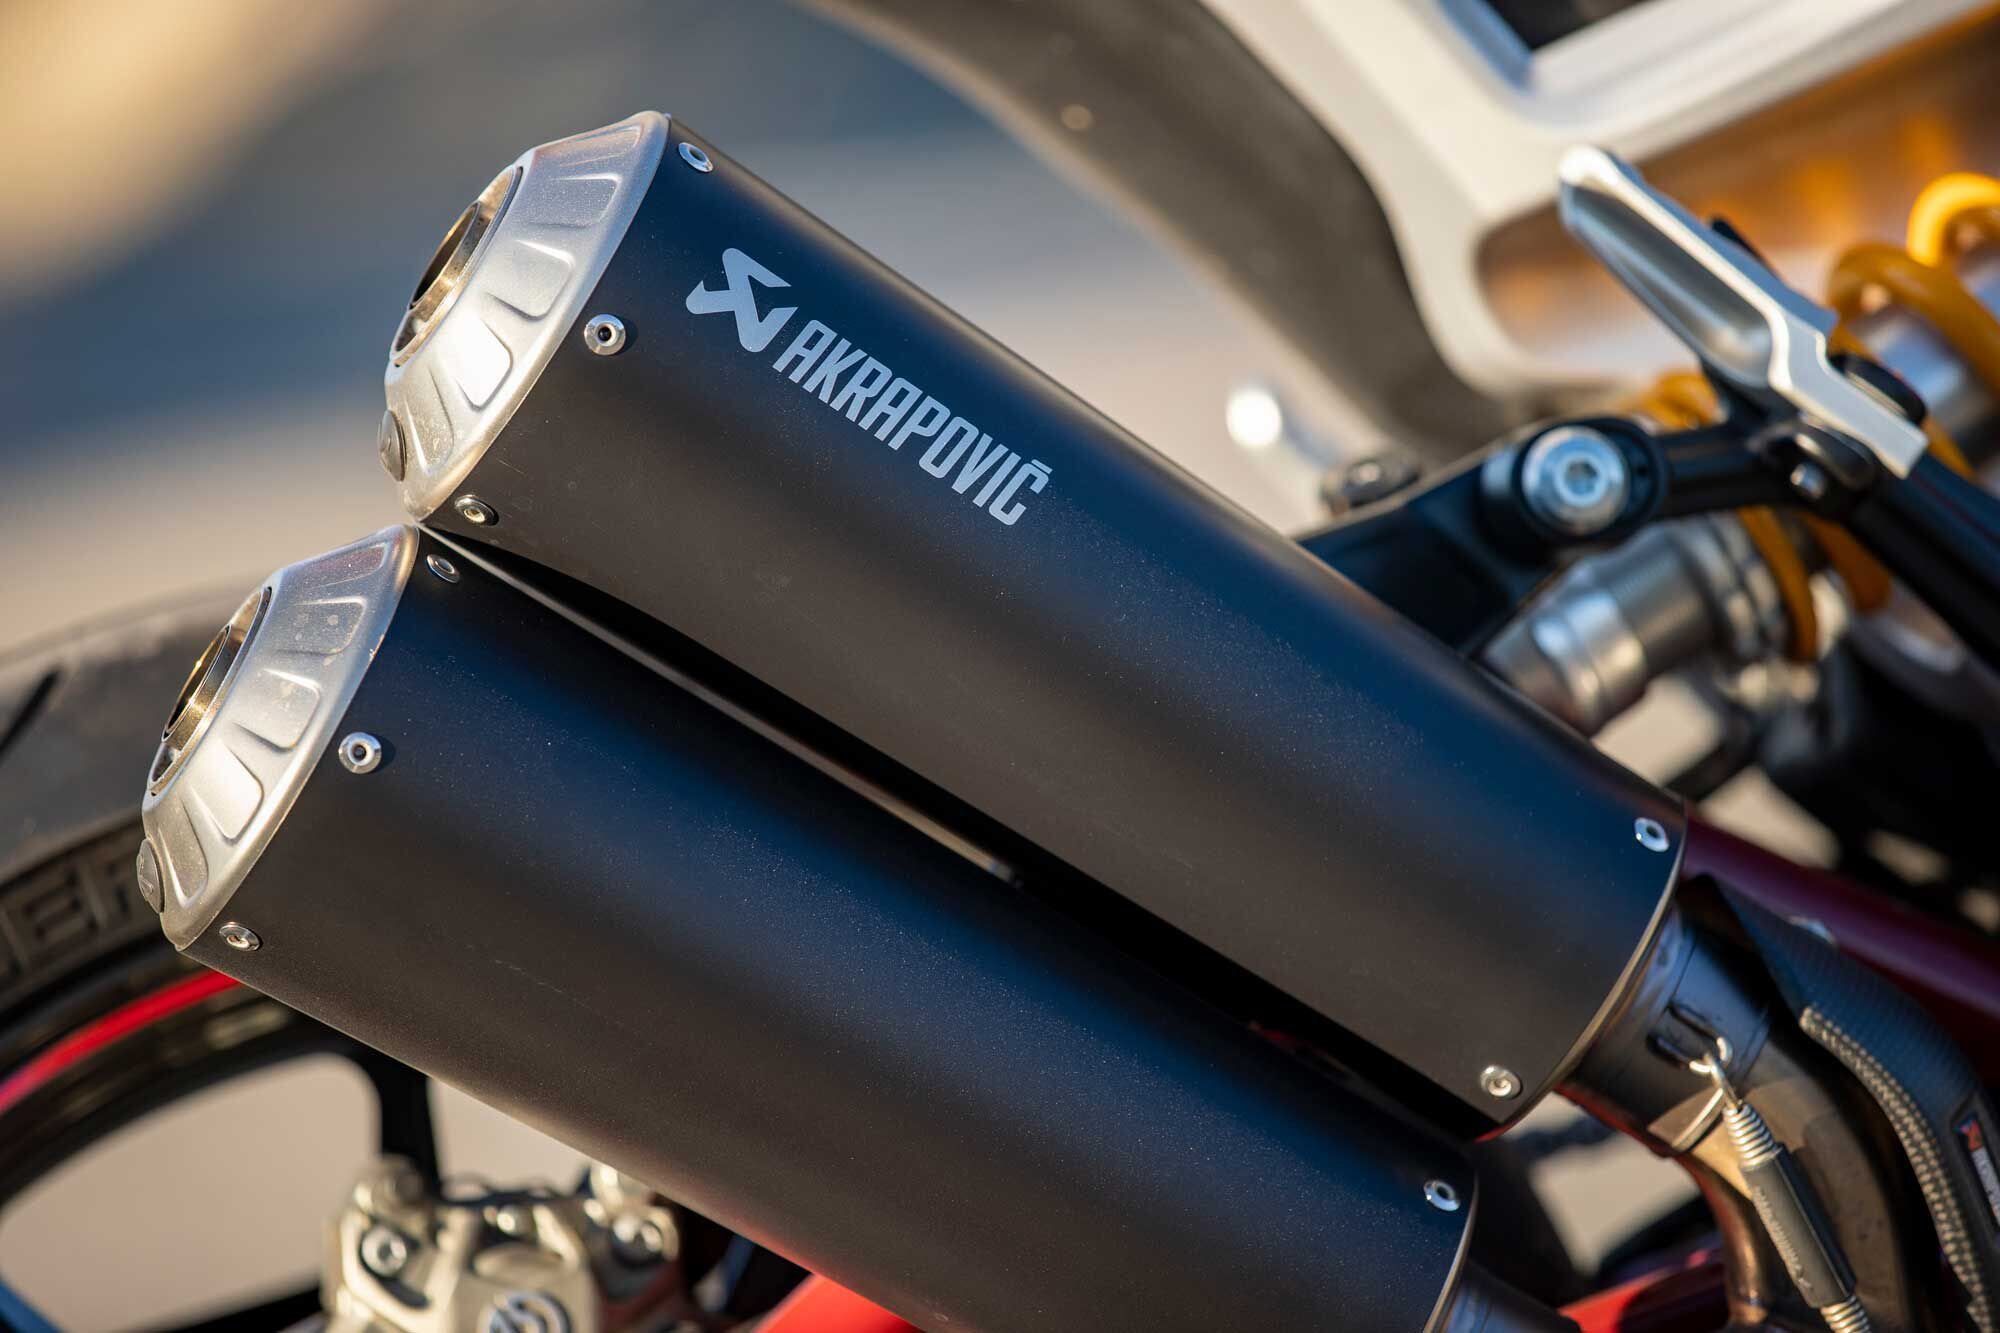 S-model FTR’s are equipped with shotgun-style Akrapovič mufflers from the factory.